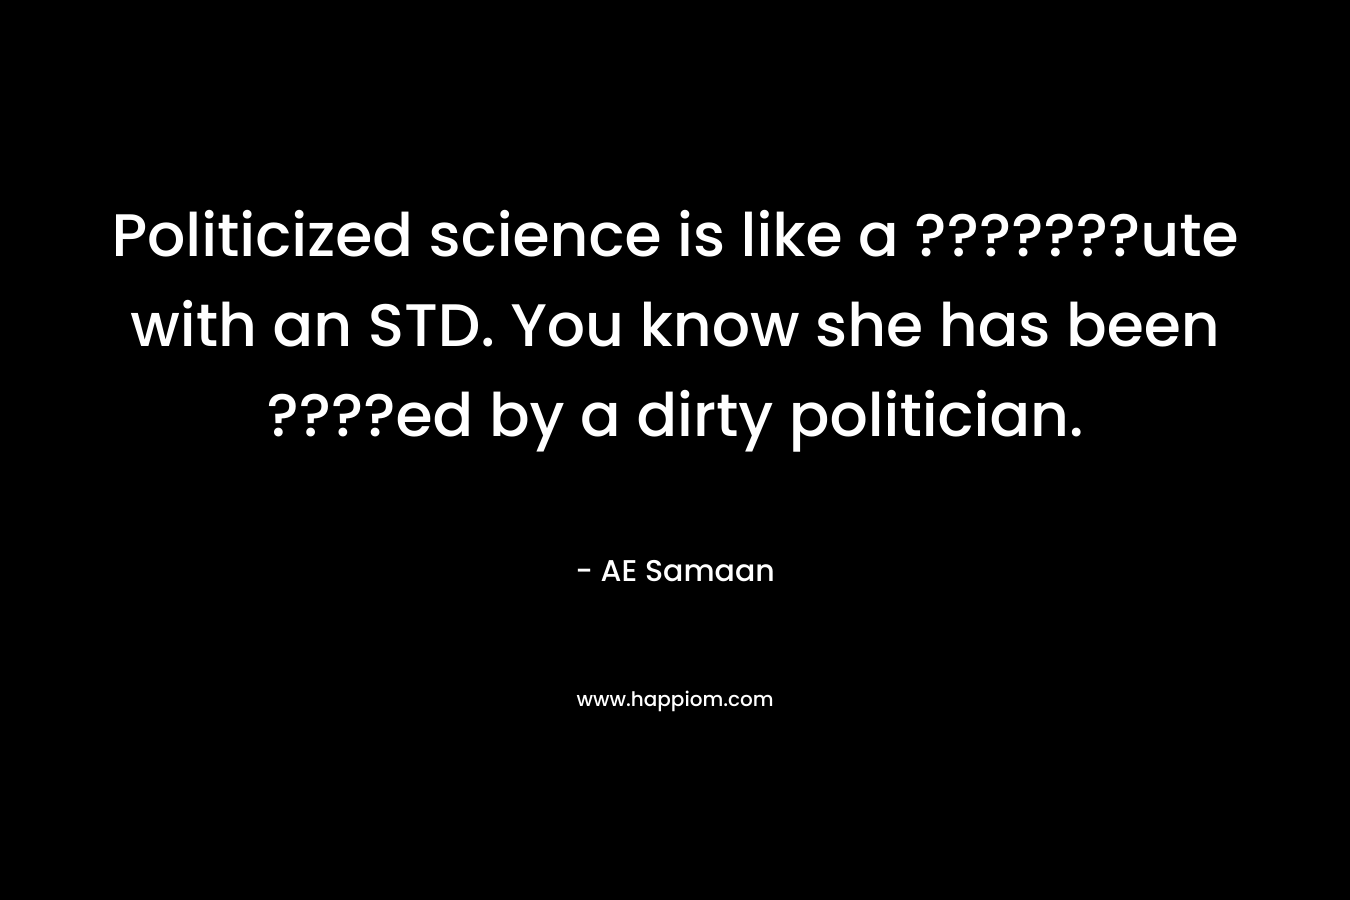 Politicized science is like a ???????ute with an STD. You know she has been ????ed by a dirty politician. – AE Samaan